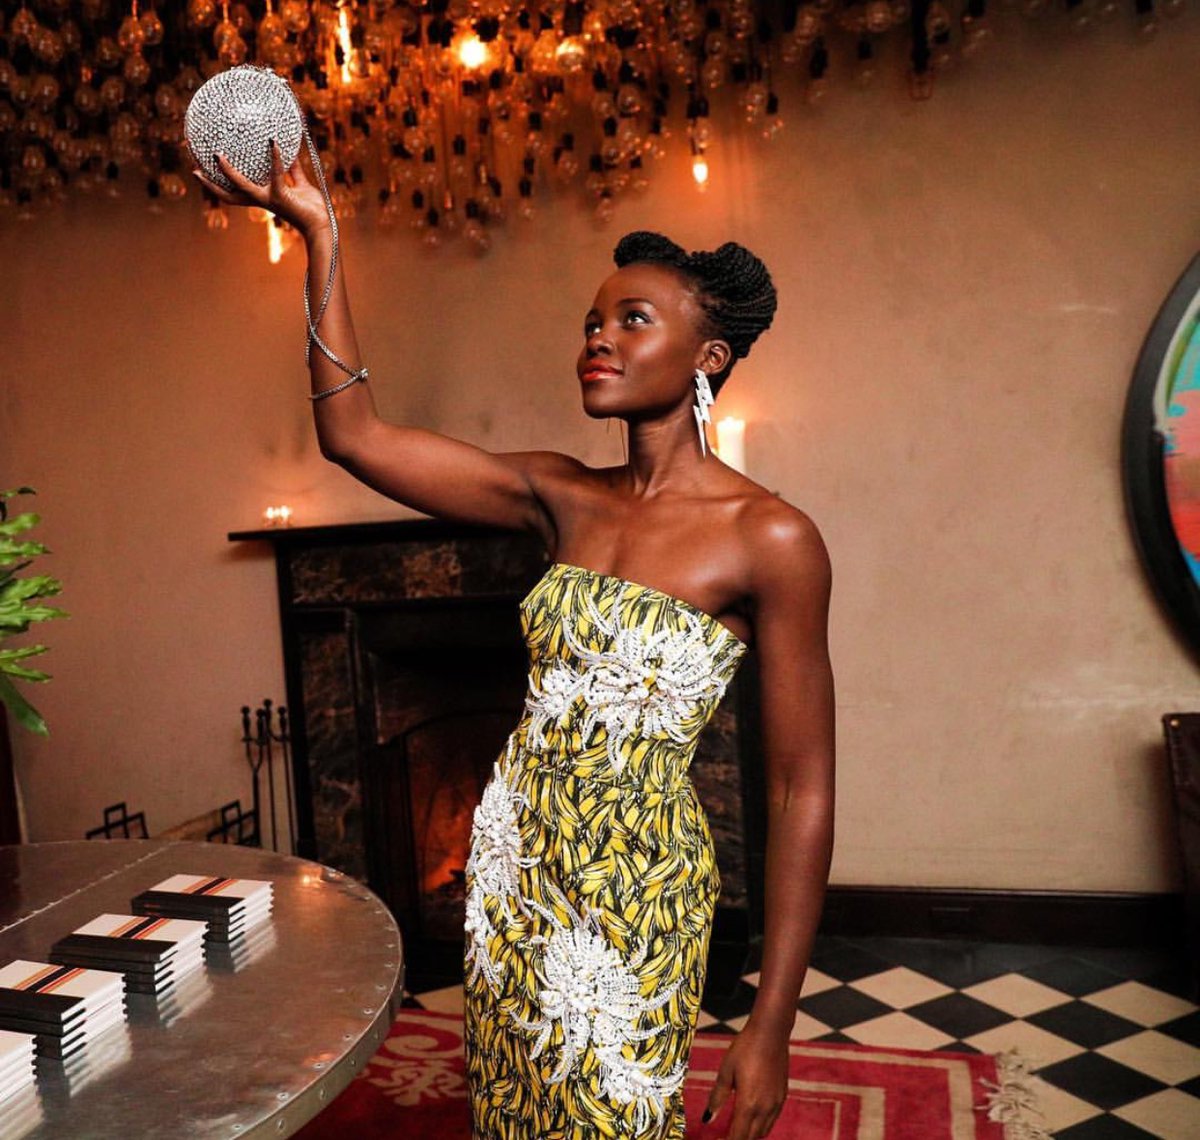 Lupita Nyong’o at Micaela Erlanger’s ‘How to Accessorize’ book launch via Instagram @lupitanyongo